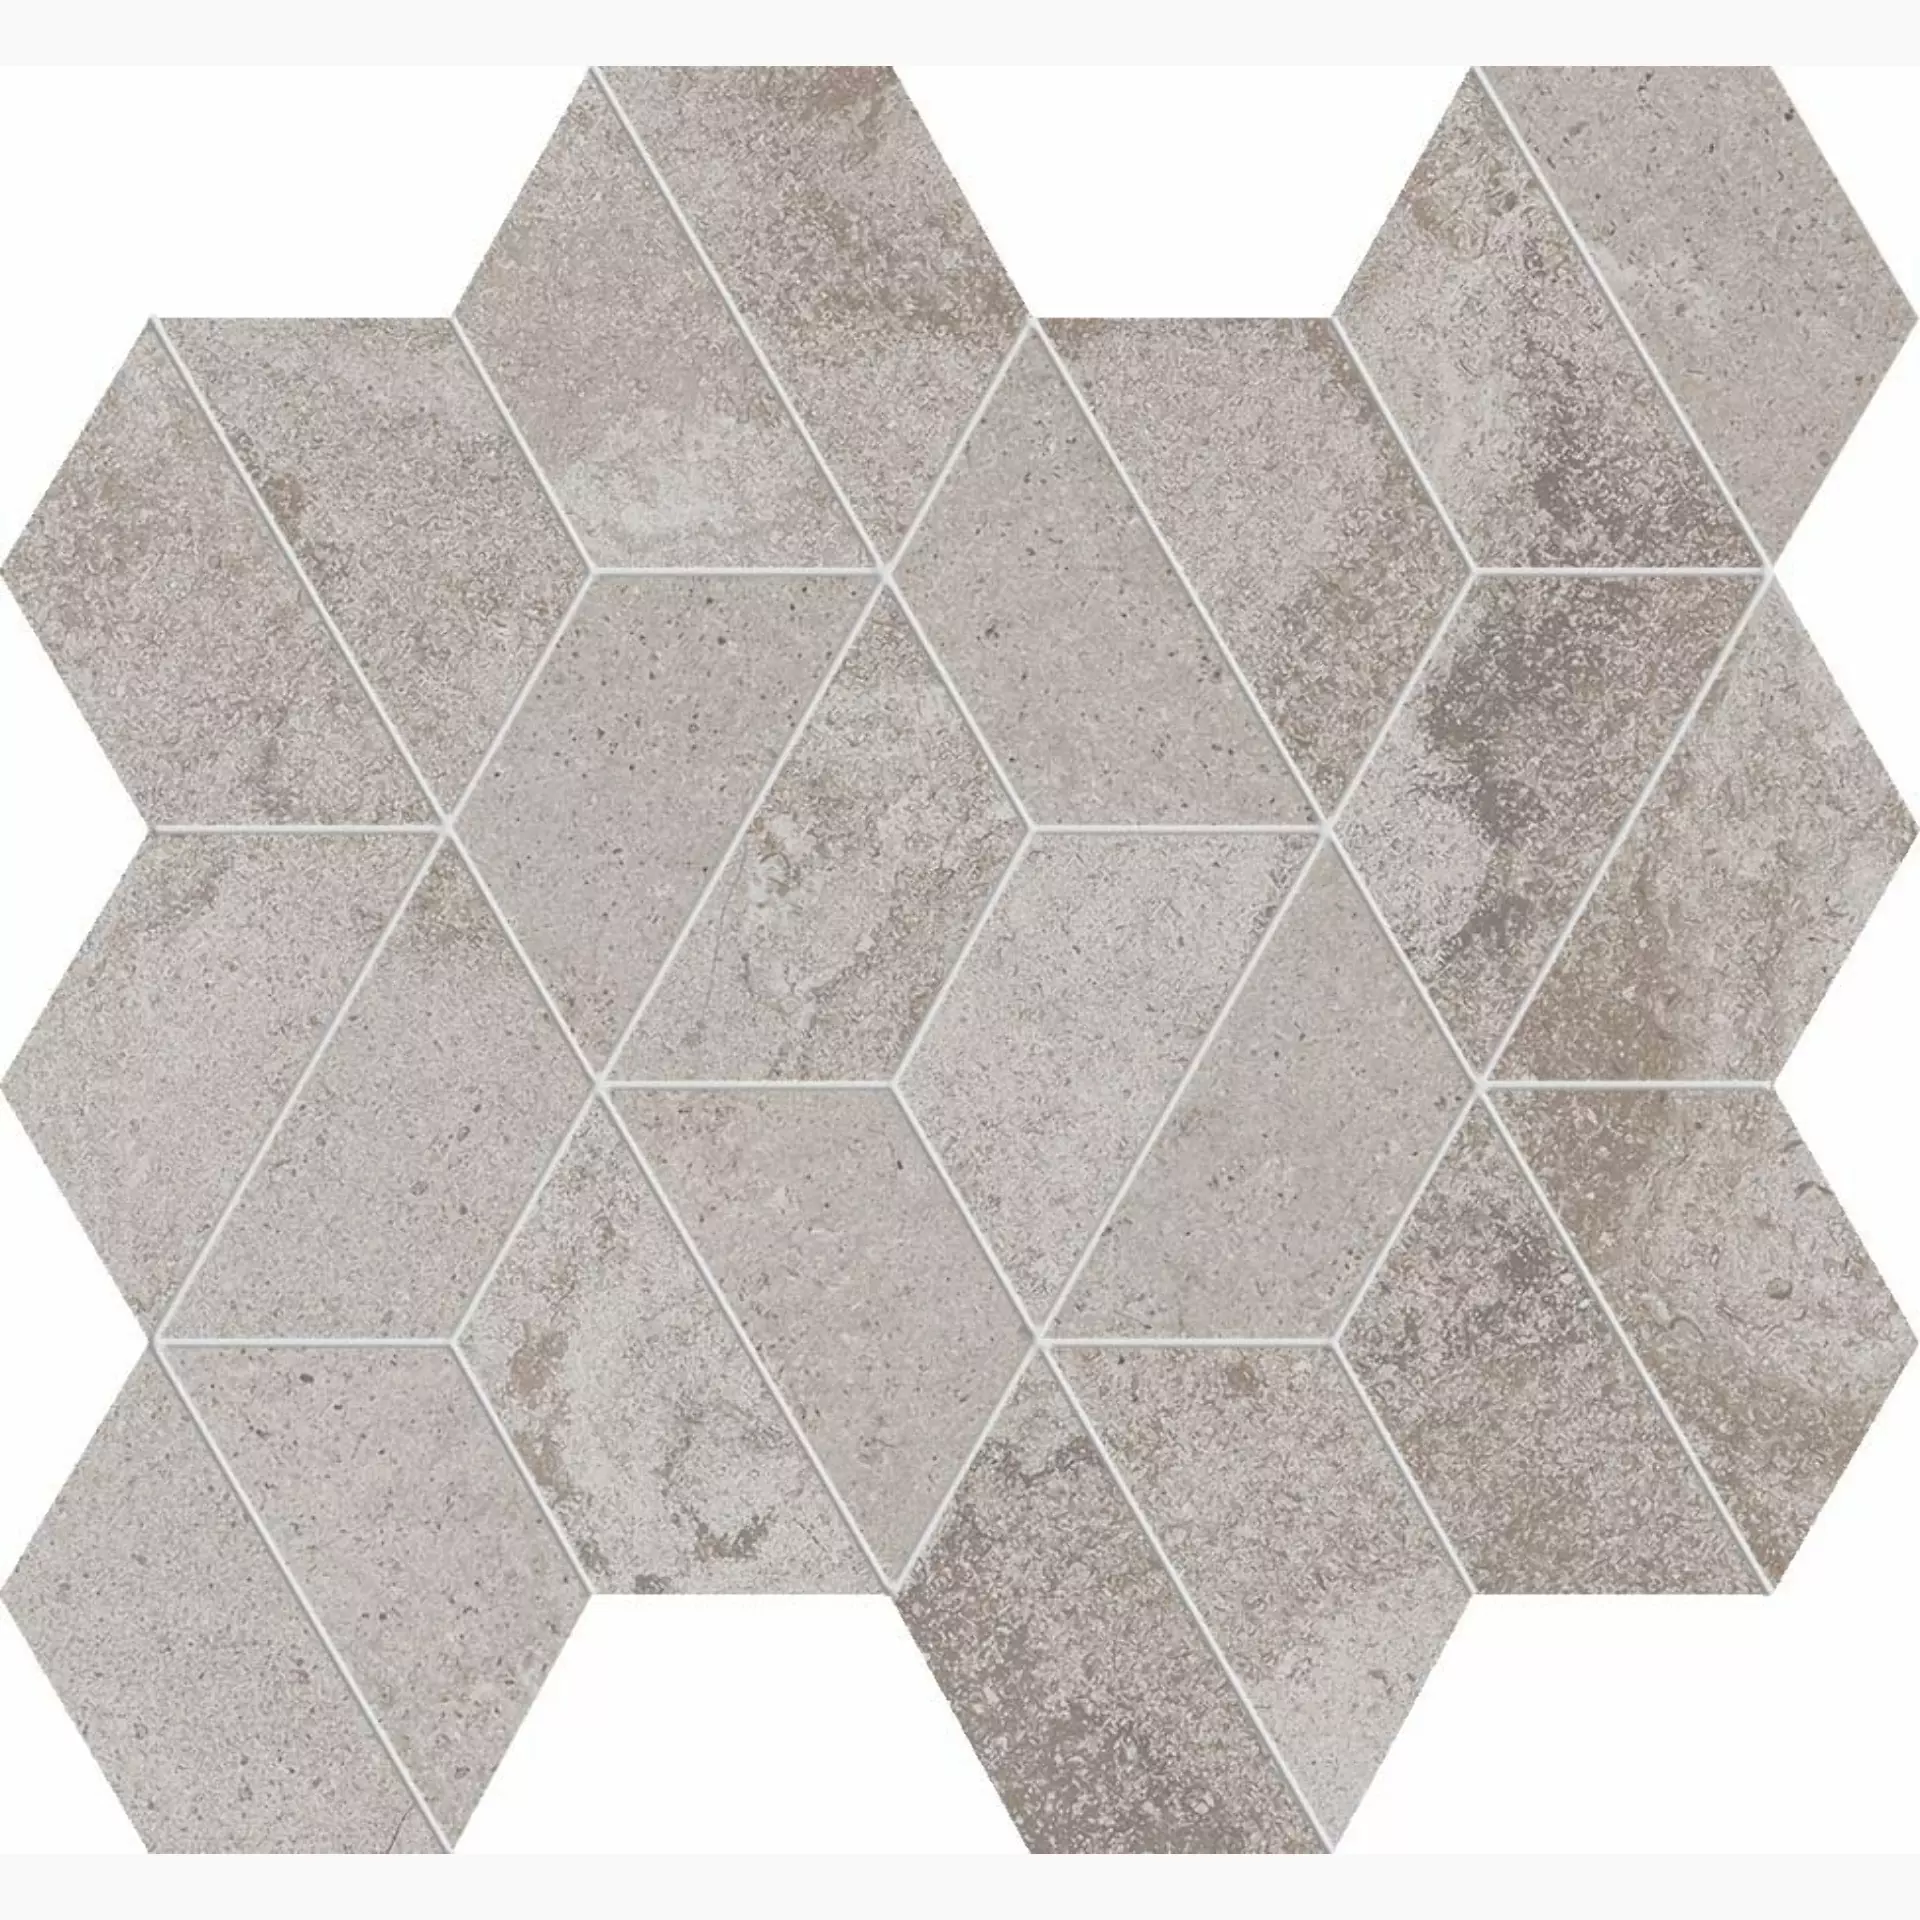 ABK Alpes Wide Grey Naturale Mosaic Enigma PF60000289 30x34cm rectified 8,5mm